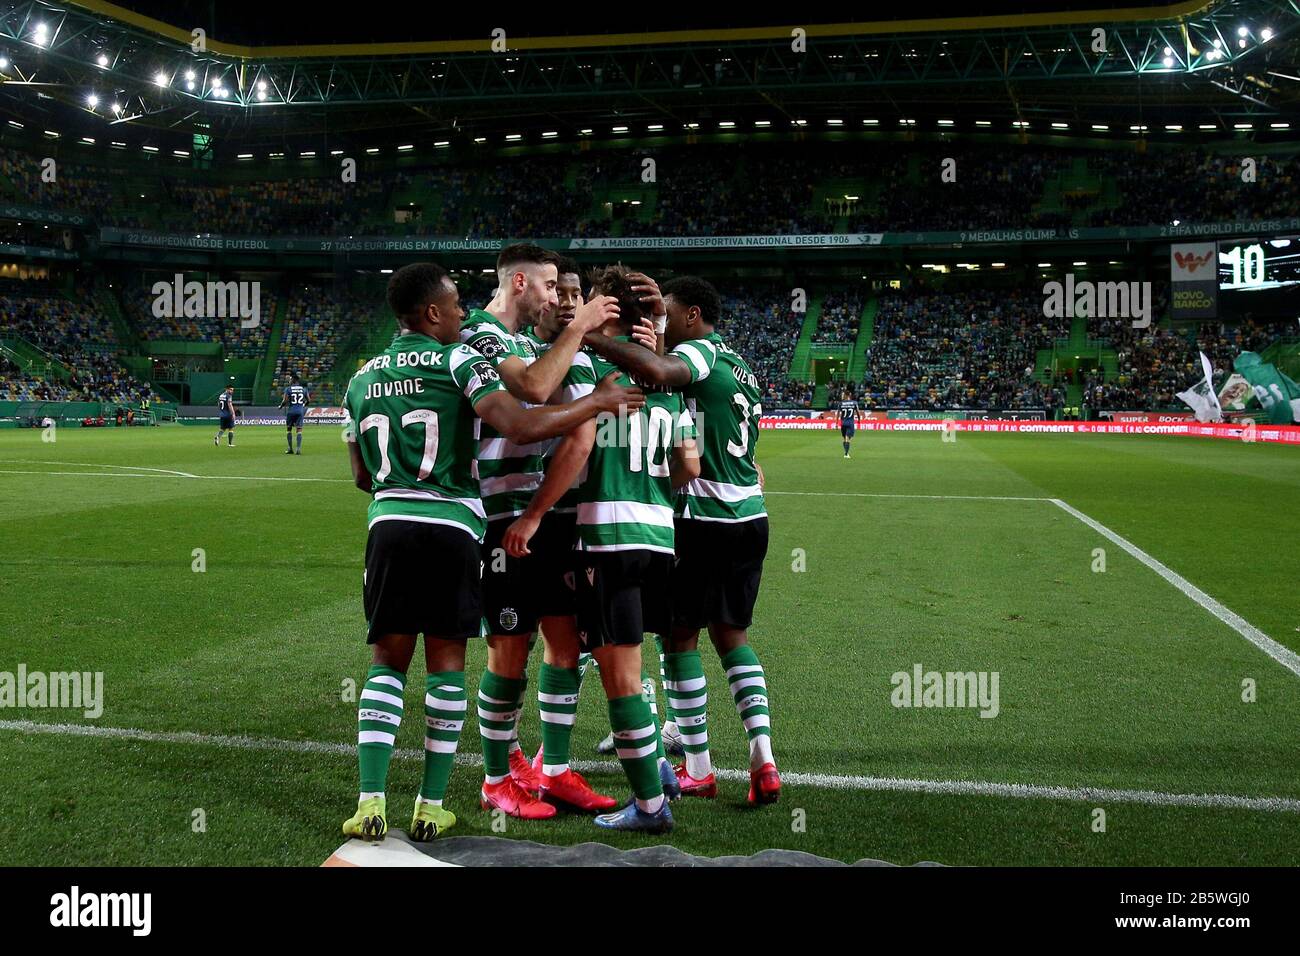 Lisbon. 8th Mar, 2020. Players of Sporting CP celebrate after scoring during the Portuguese First League soccer match between Sporting CP and Desportivo das Aves in Lisbon, Portugal on March 8, 2020. Credit: Pedro Fiuza/Xinhua/Alamy Live News Stock Photo